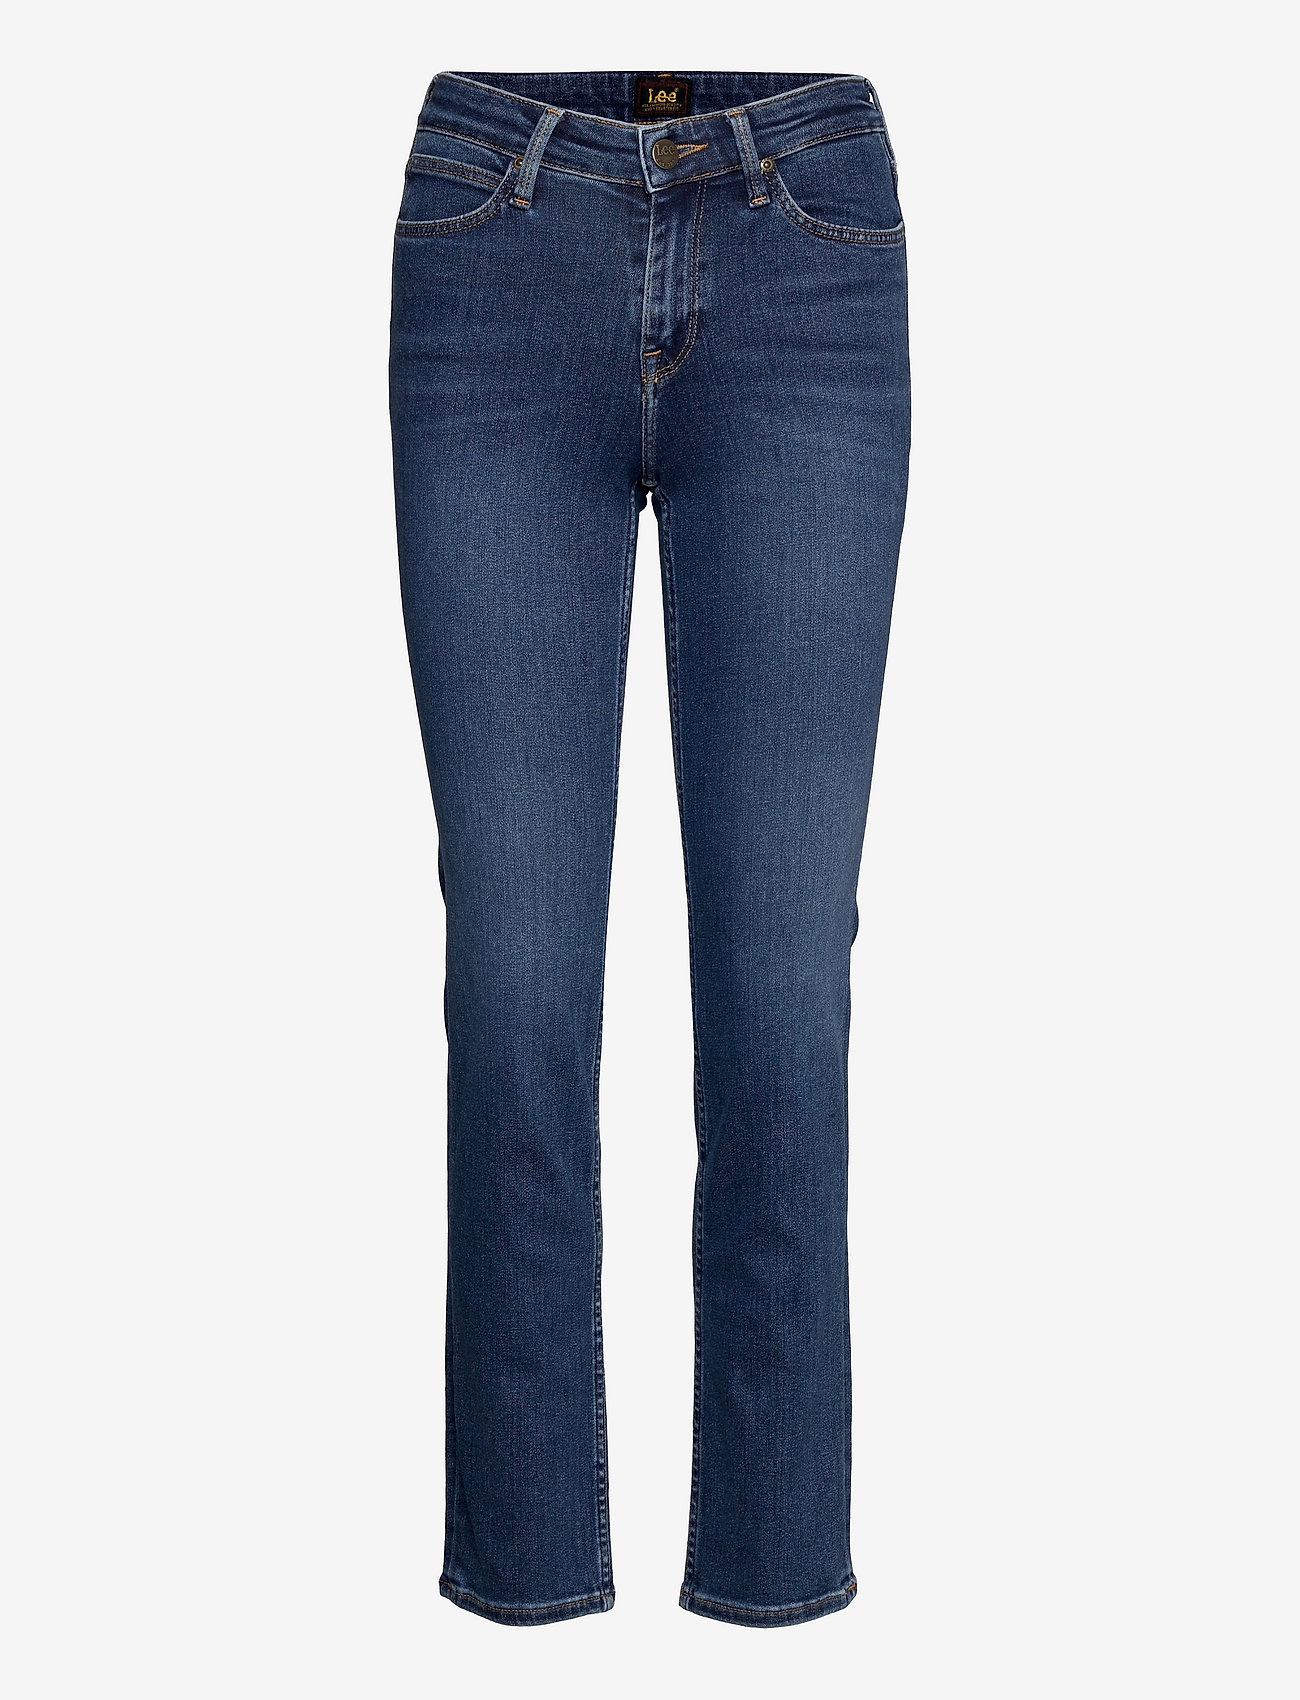 Lee Jeans - MARION STRAIGHT - straight jeans - mid remi - 0